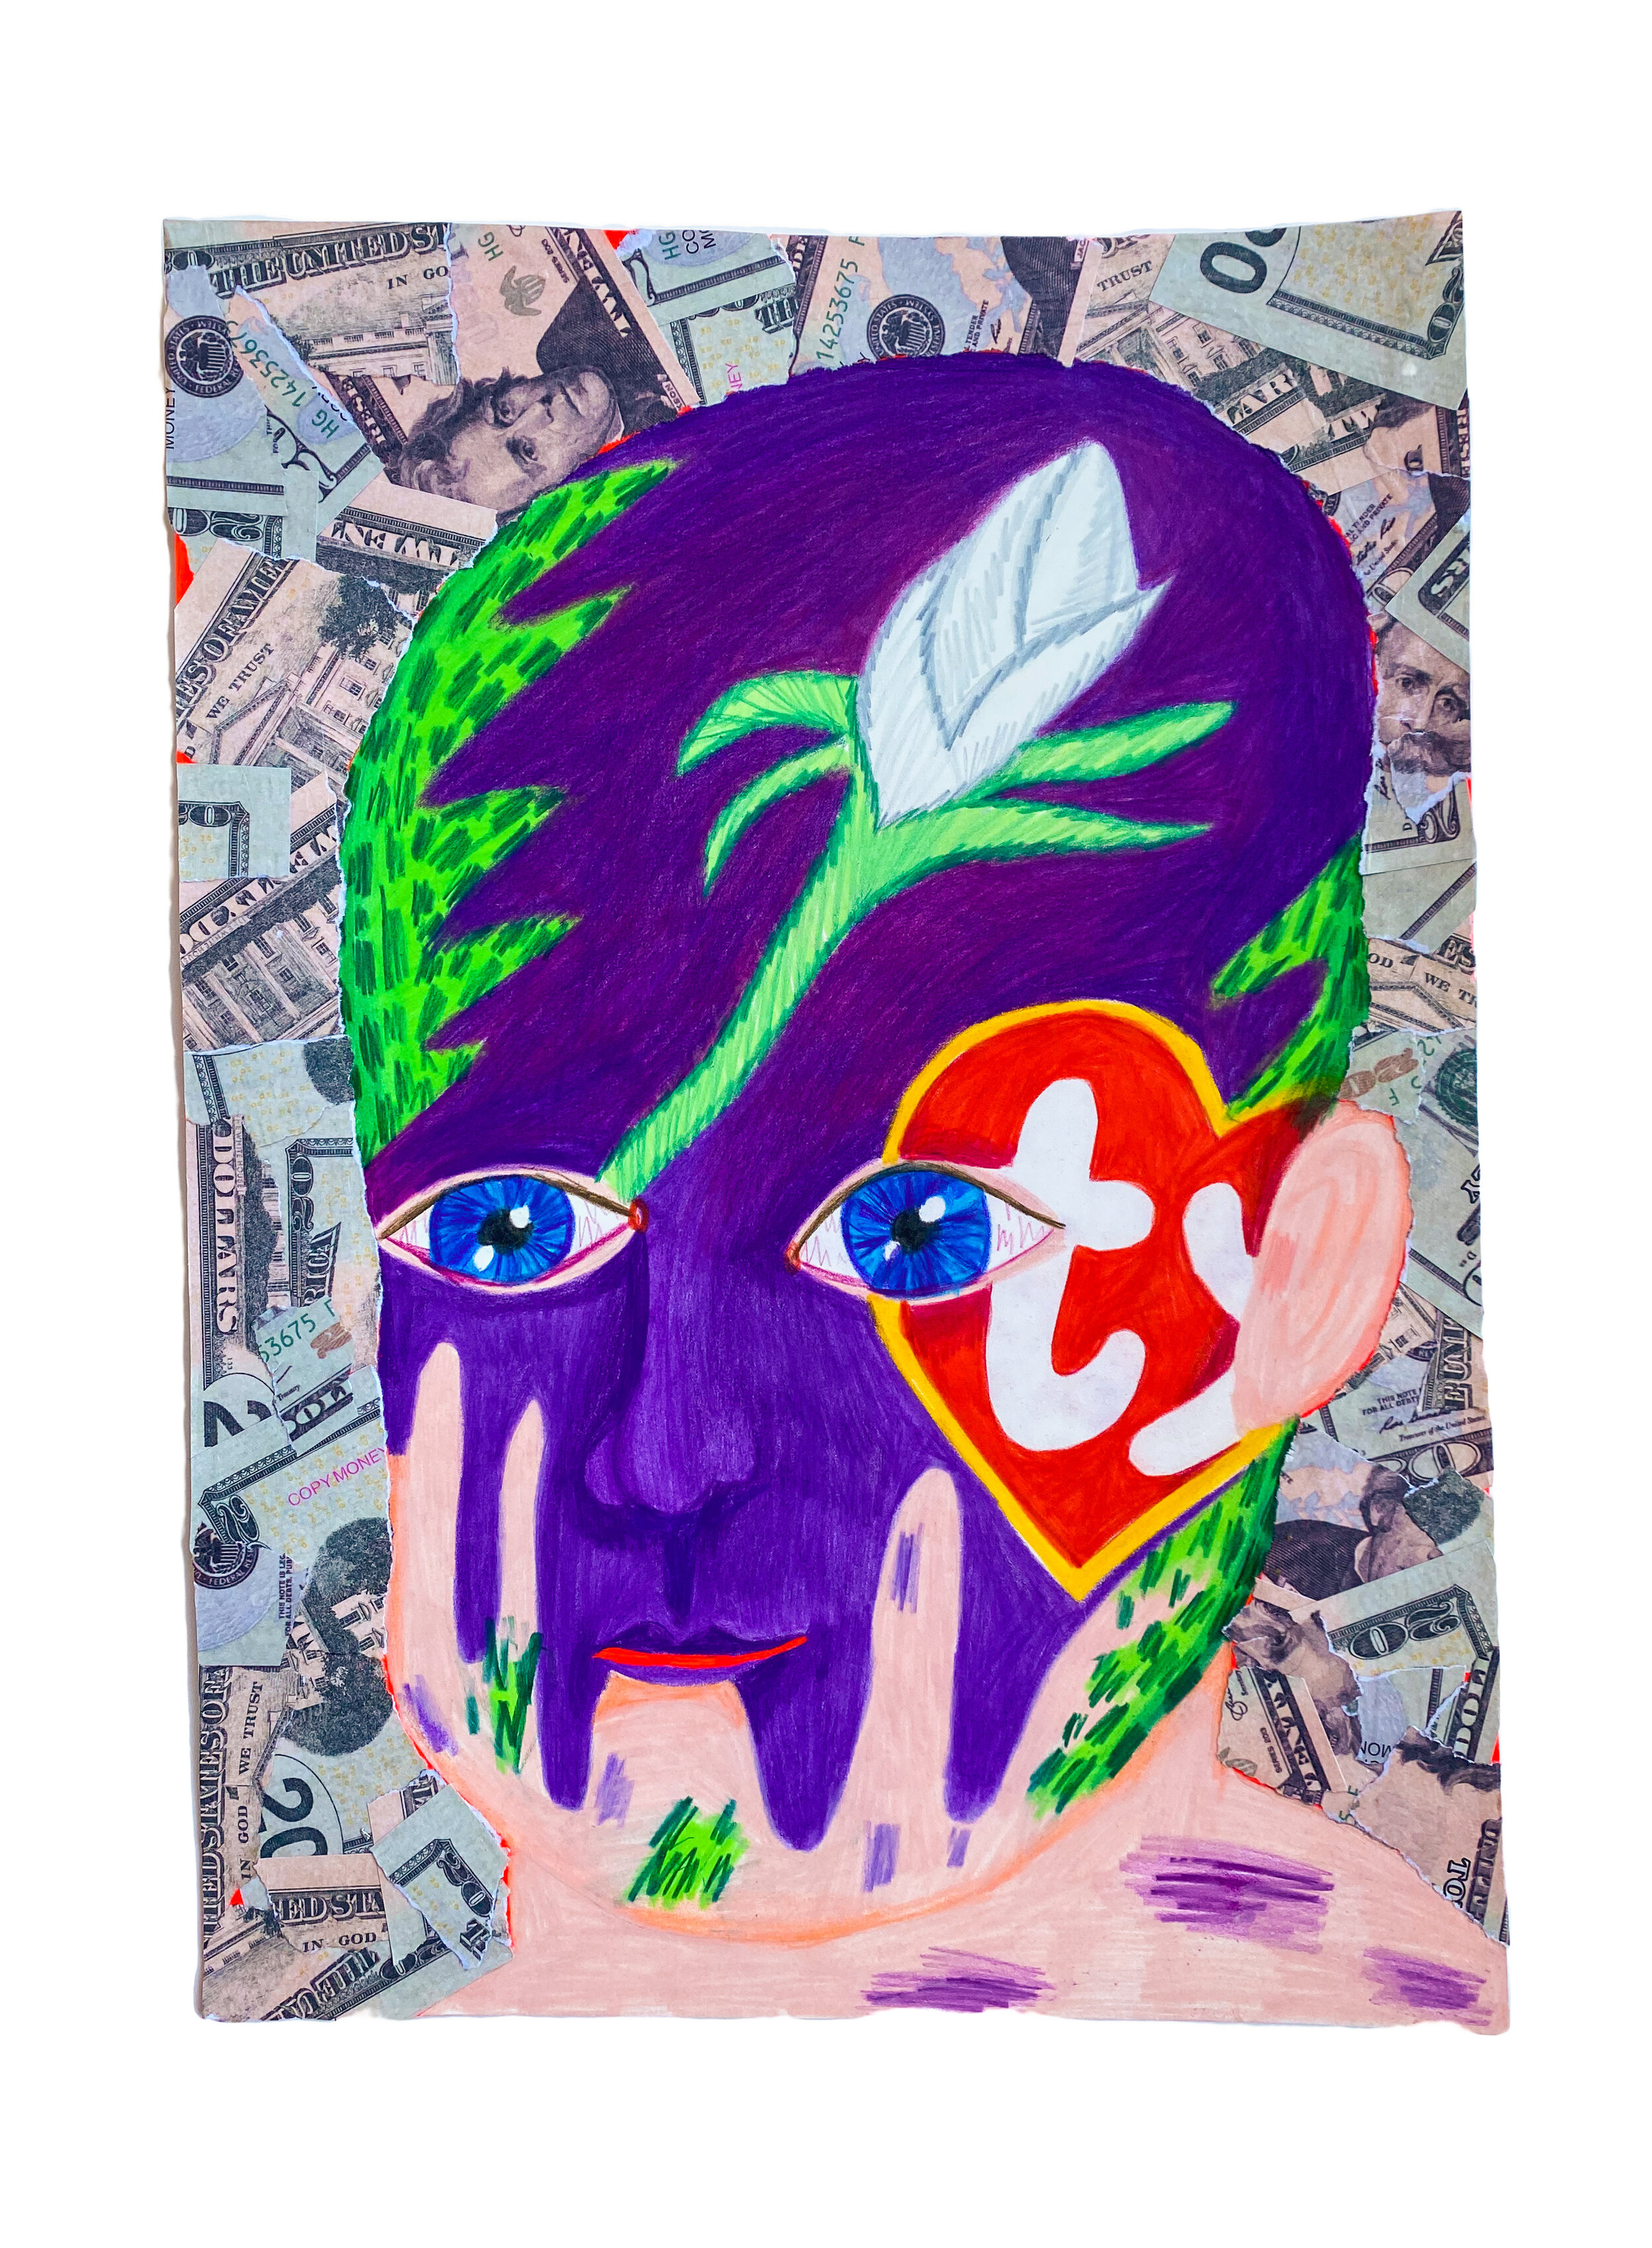  Princess Diana TY Beanie Baby Face Paint on Baby, 2020  14 x 10 inches (35.56 x 25.4 cm.)  Colored pencil, Modge Podge, acrylic paint, and fake money on paper  Private collection 